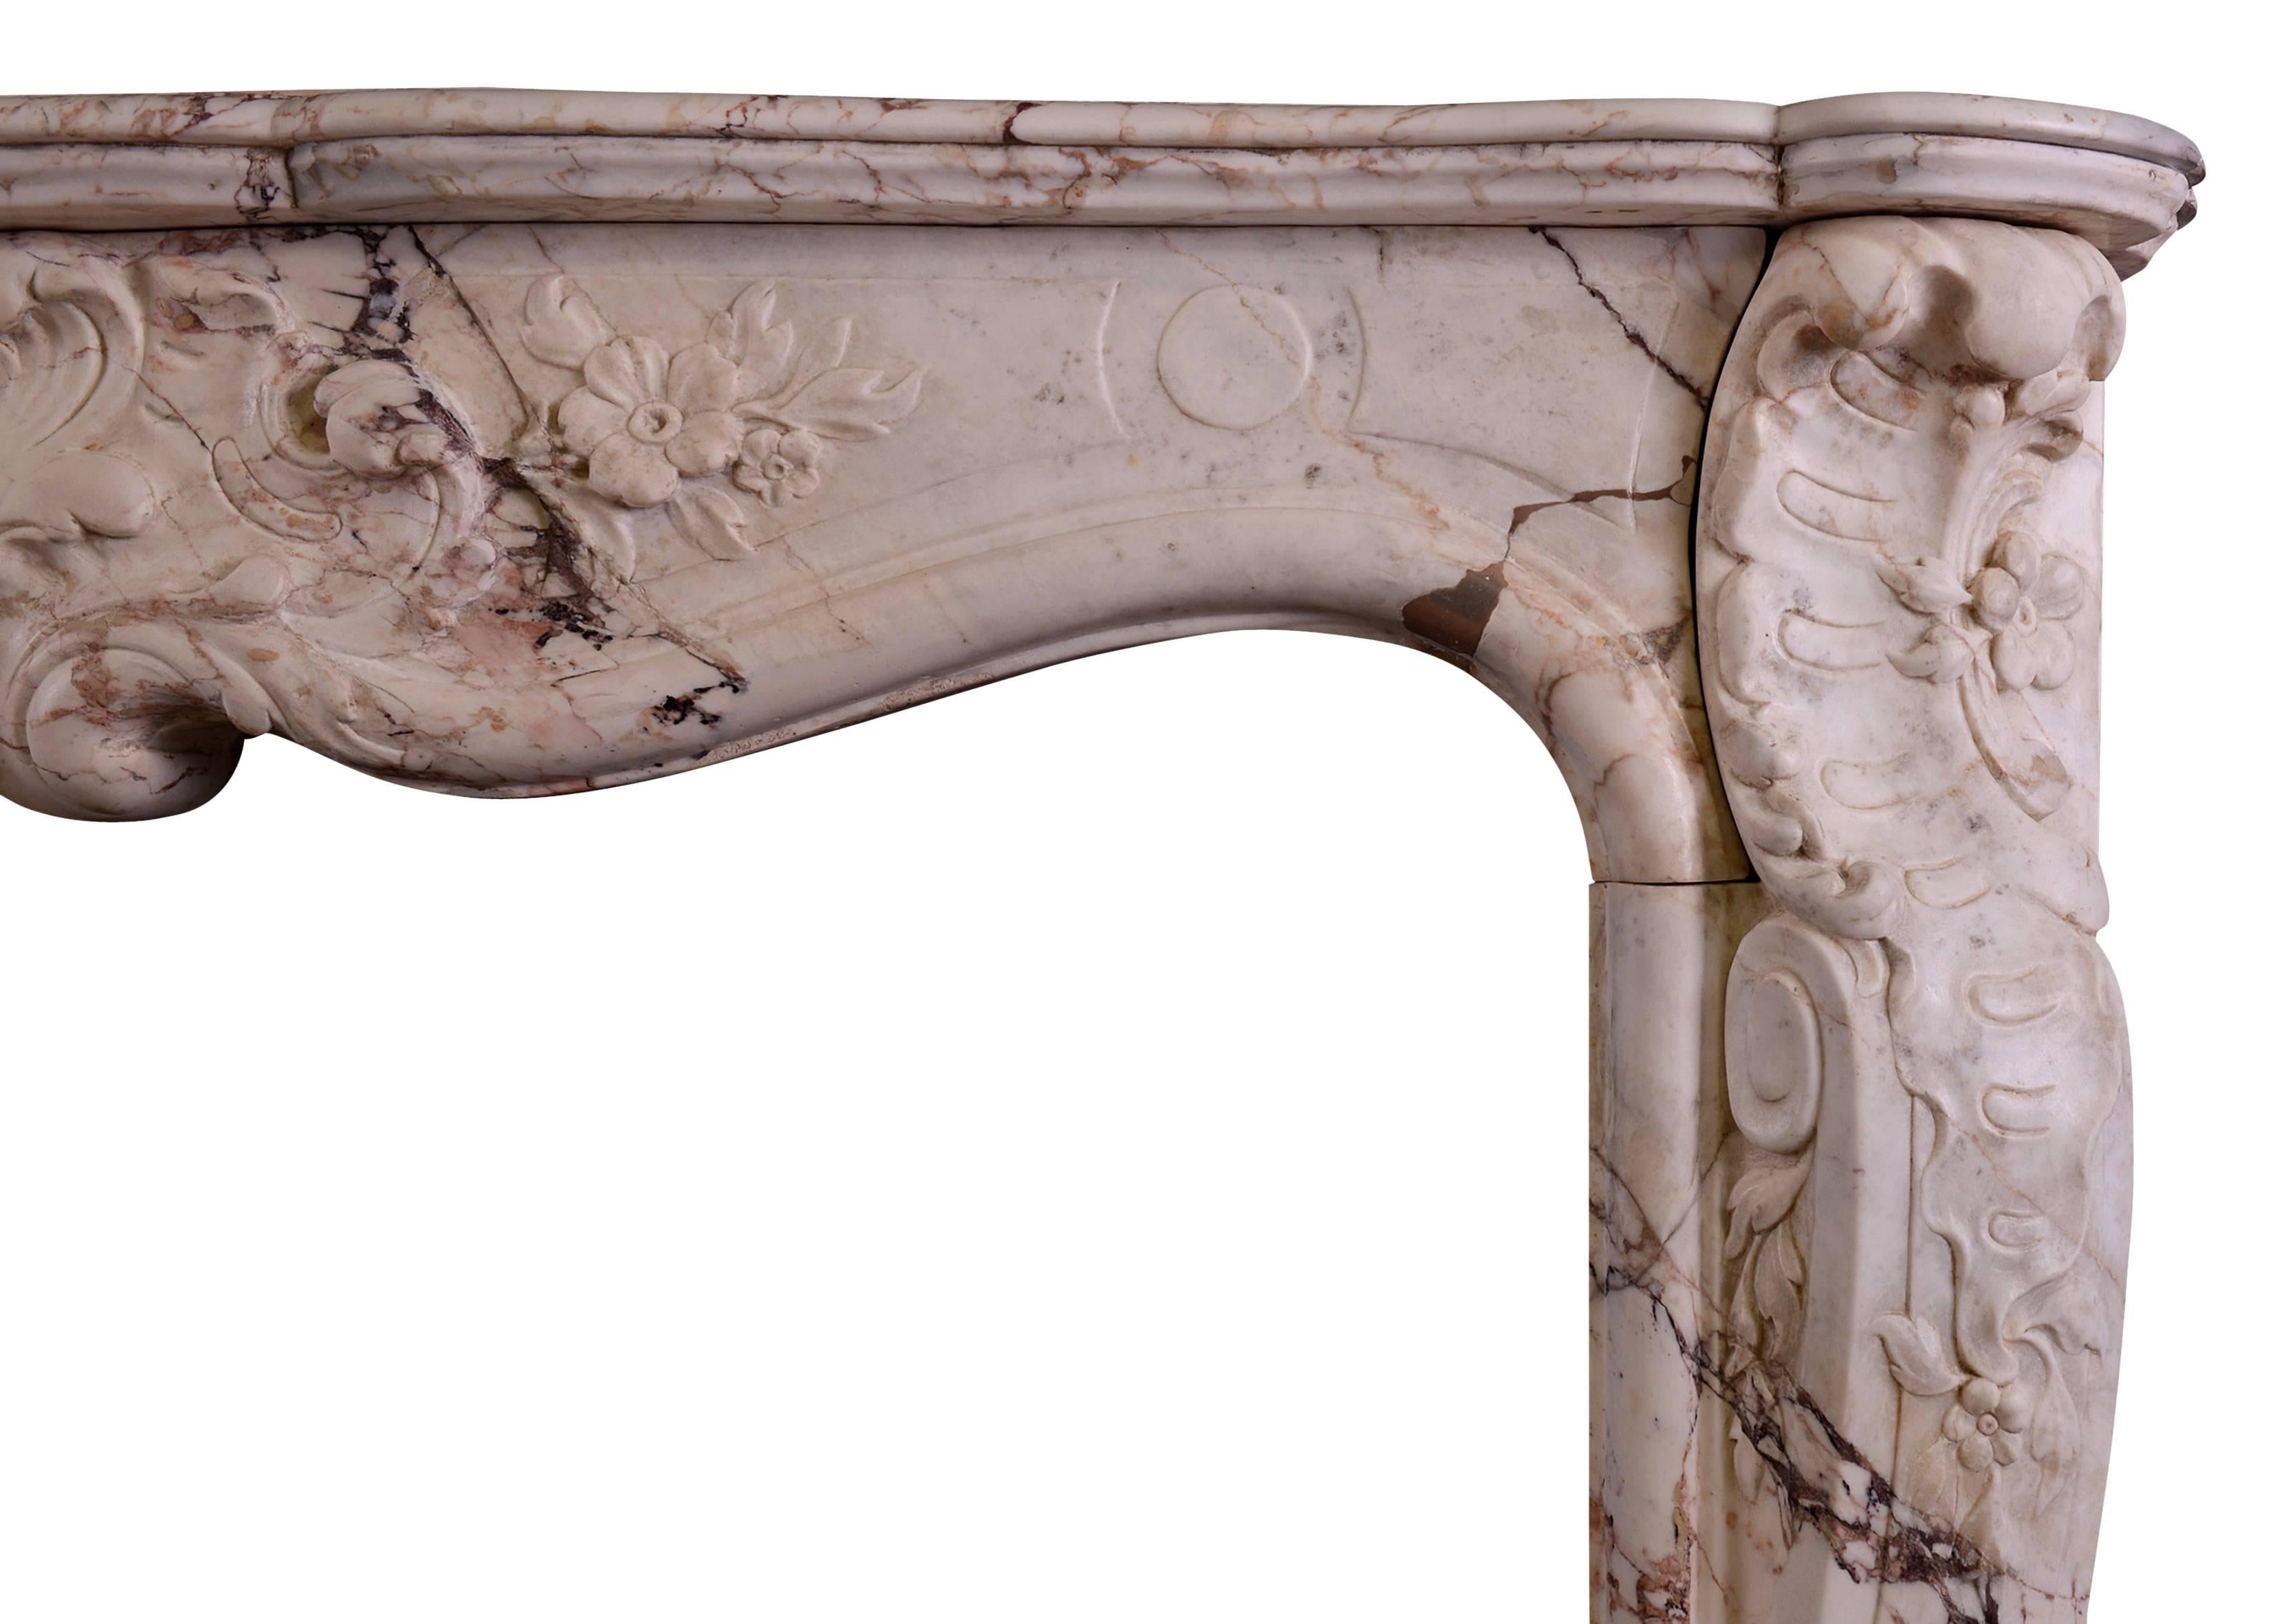 An 18th century Louis XV fireplace in a variegated Breche marble. The sweeping jambs with turned over leaf carving to tops and bases, the frieze with carved center of flowers and foliage. Serpentine shaped shelf.

Measure: Shelf width 1518 mm 59 ¾